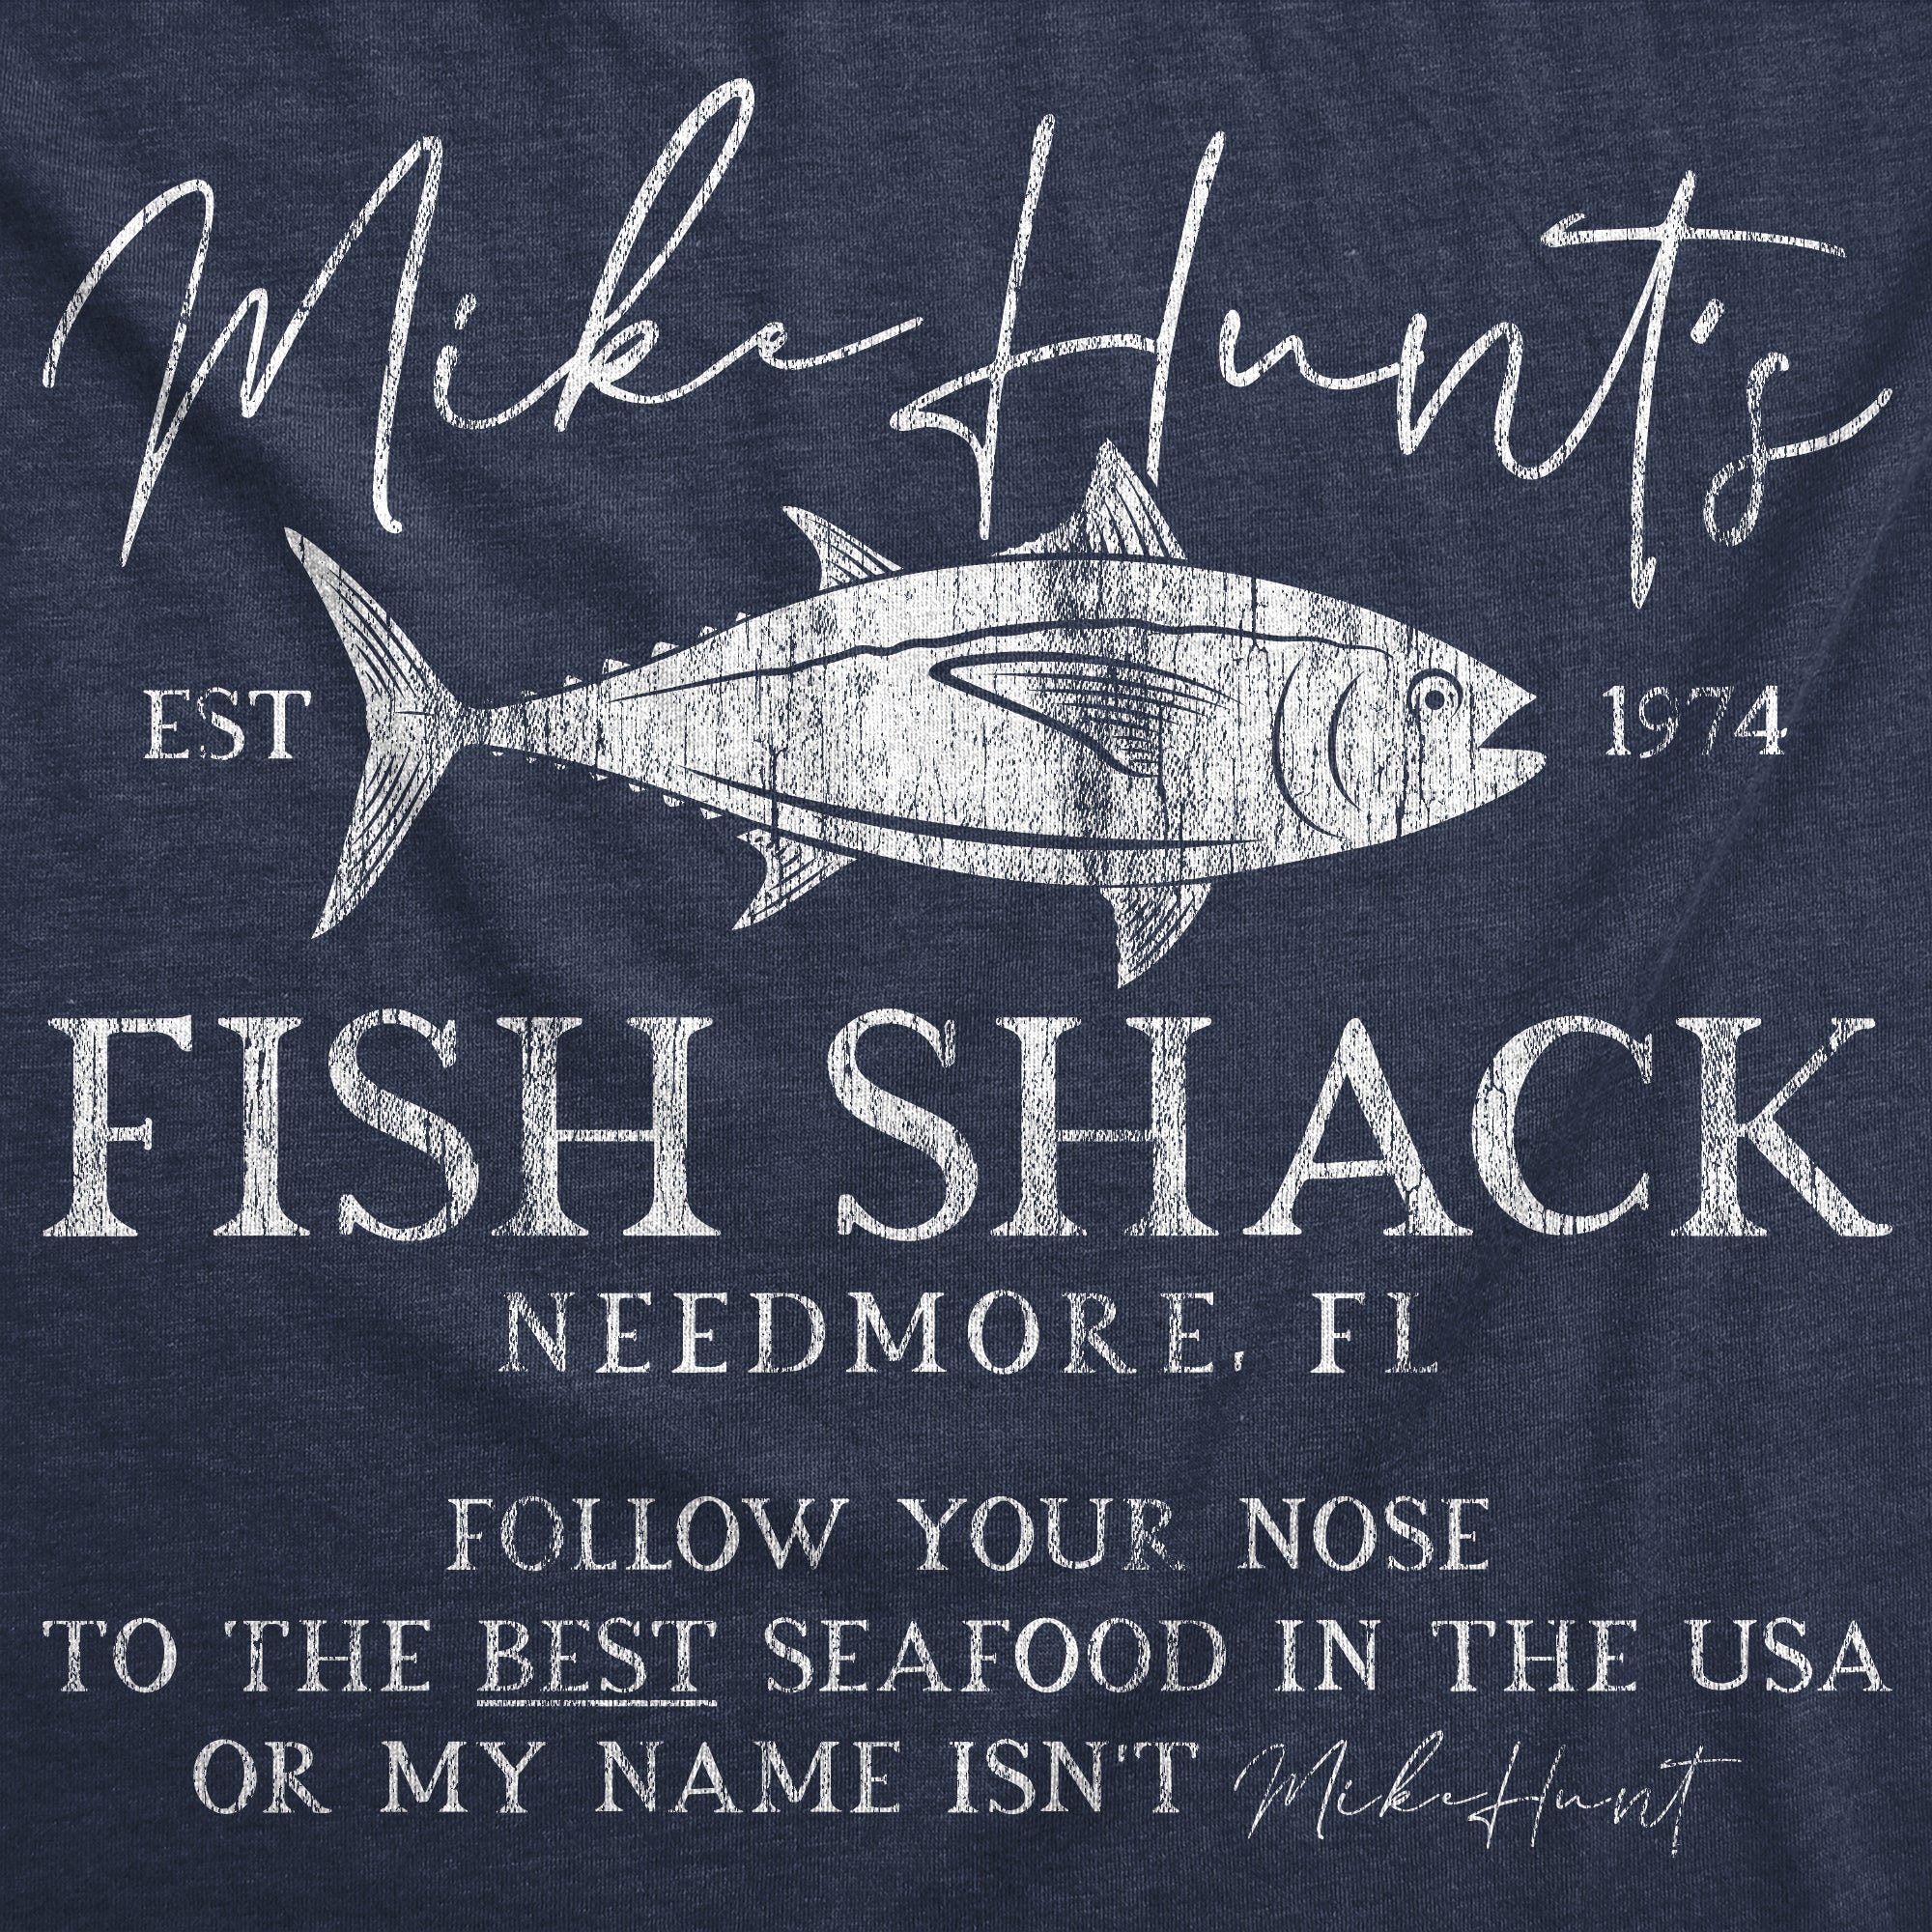 Funny Heather Navy - Mike Hunts Fish Shack Mike Hunts Fish Shack Mens T Shirt Nerdy sarcastic Fishing Tee